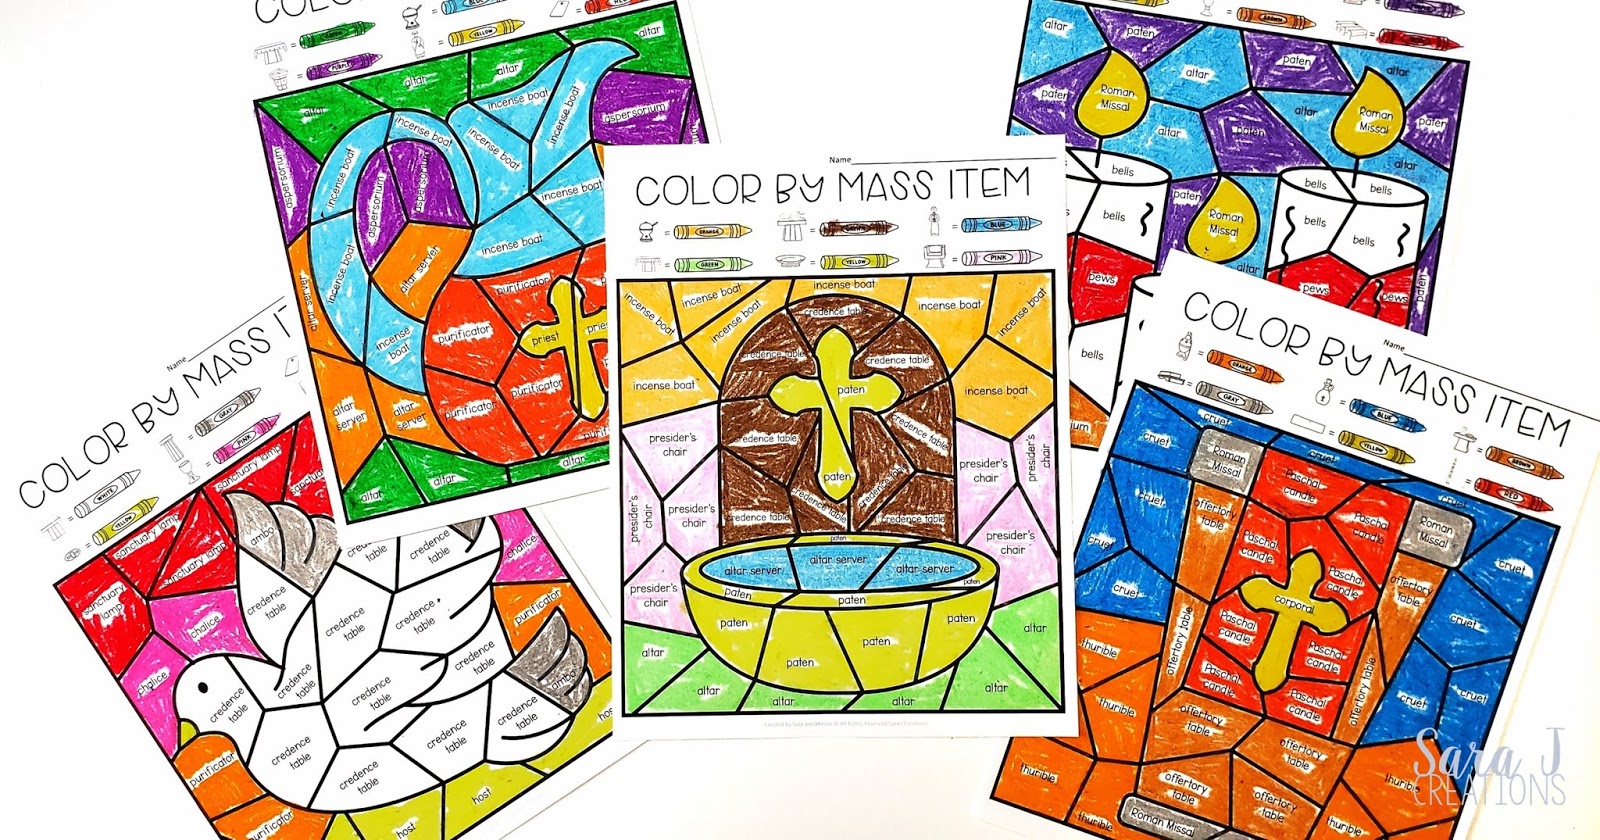 Catholic Color by Mass Item Coloring Pages | Sara J Creations